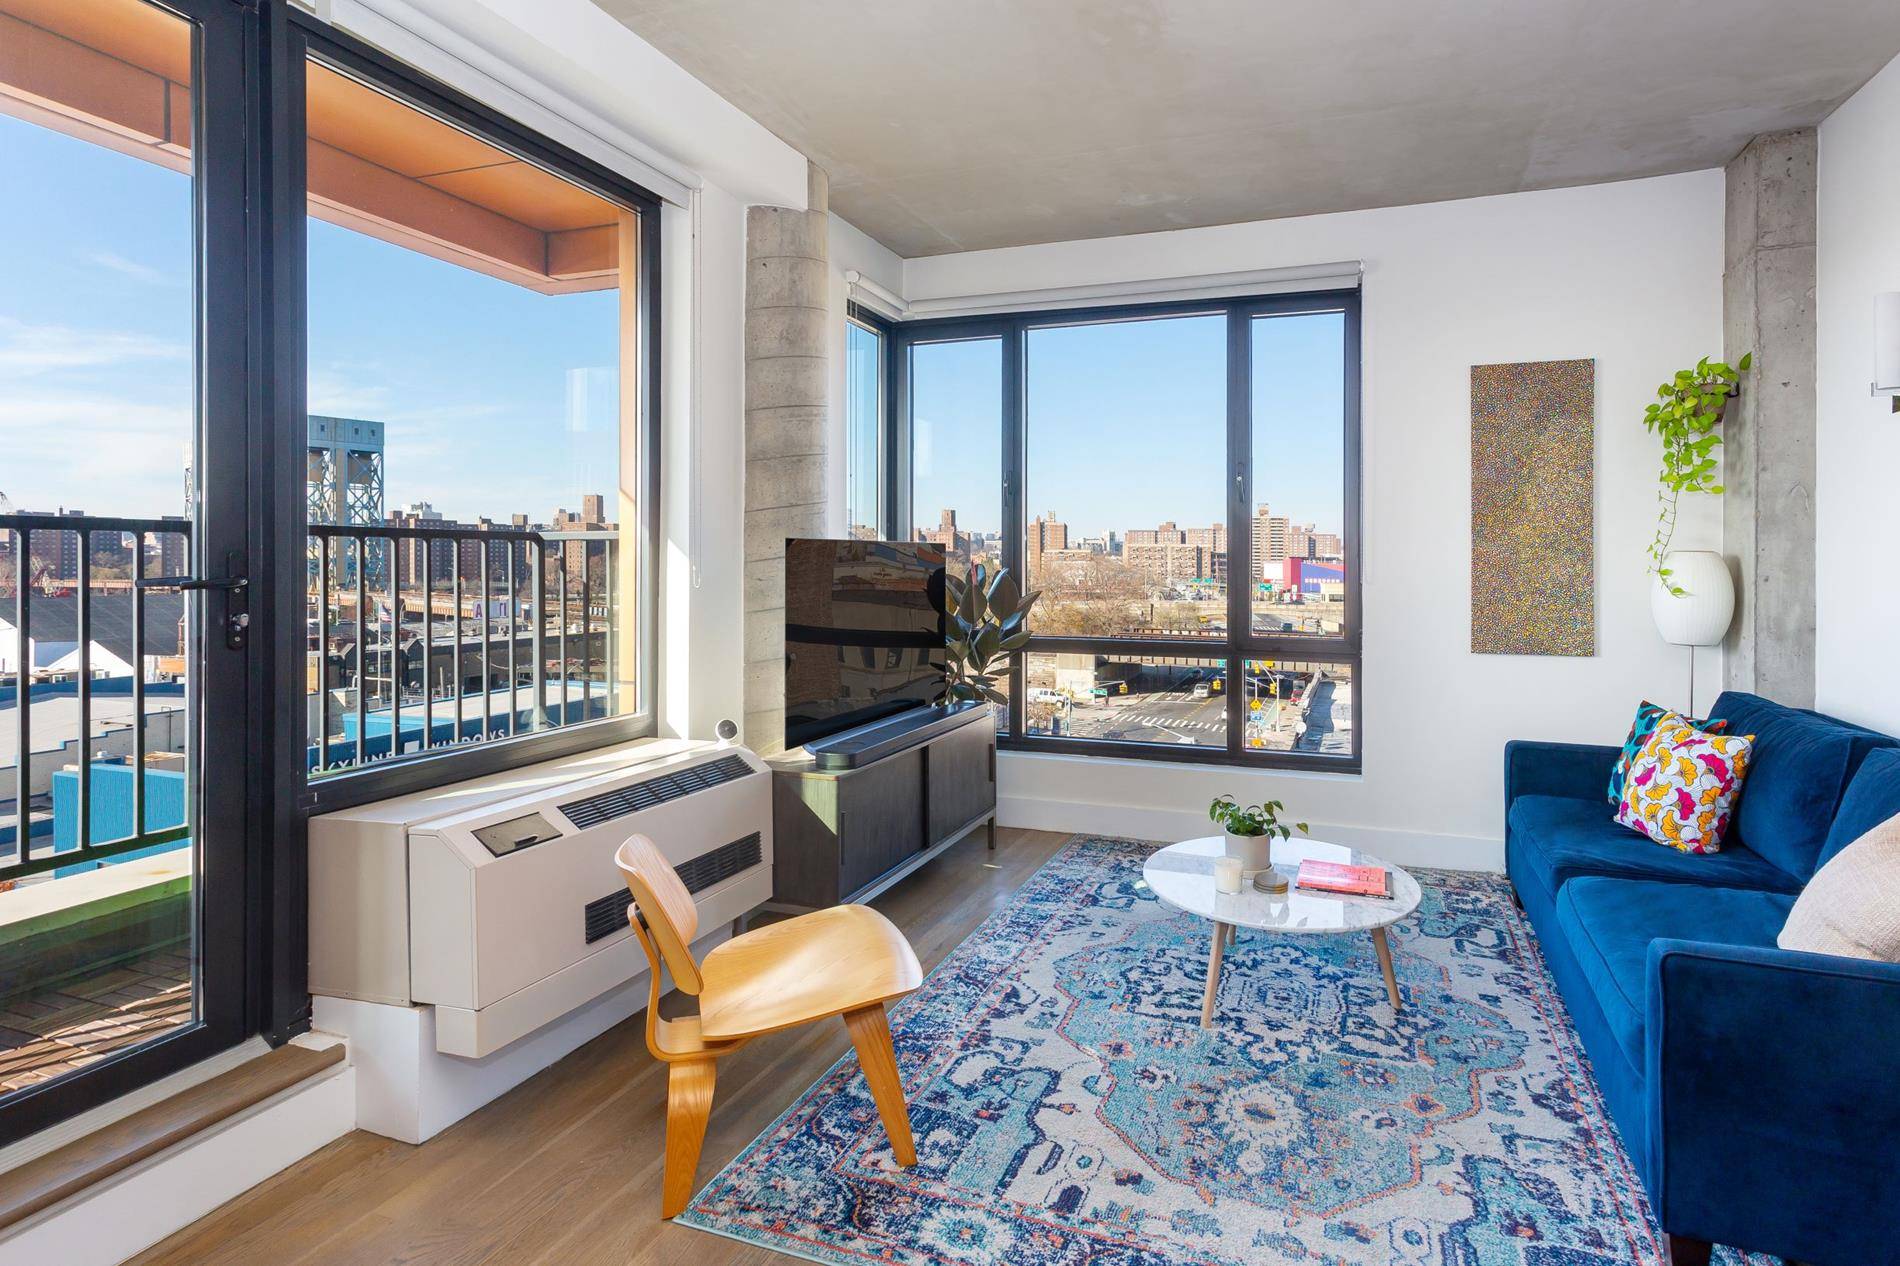 This well laid out 1 bedroom home has an industrial loft feel and is complete with exposed concrete, tall ceilings, floor to ceiling windows and Midtown Manhattan views.